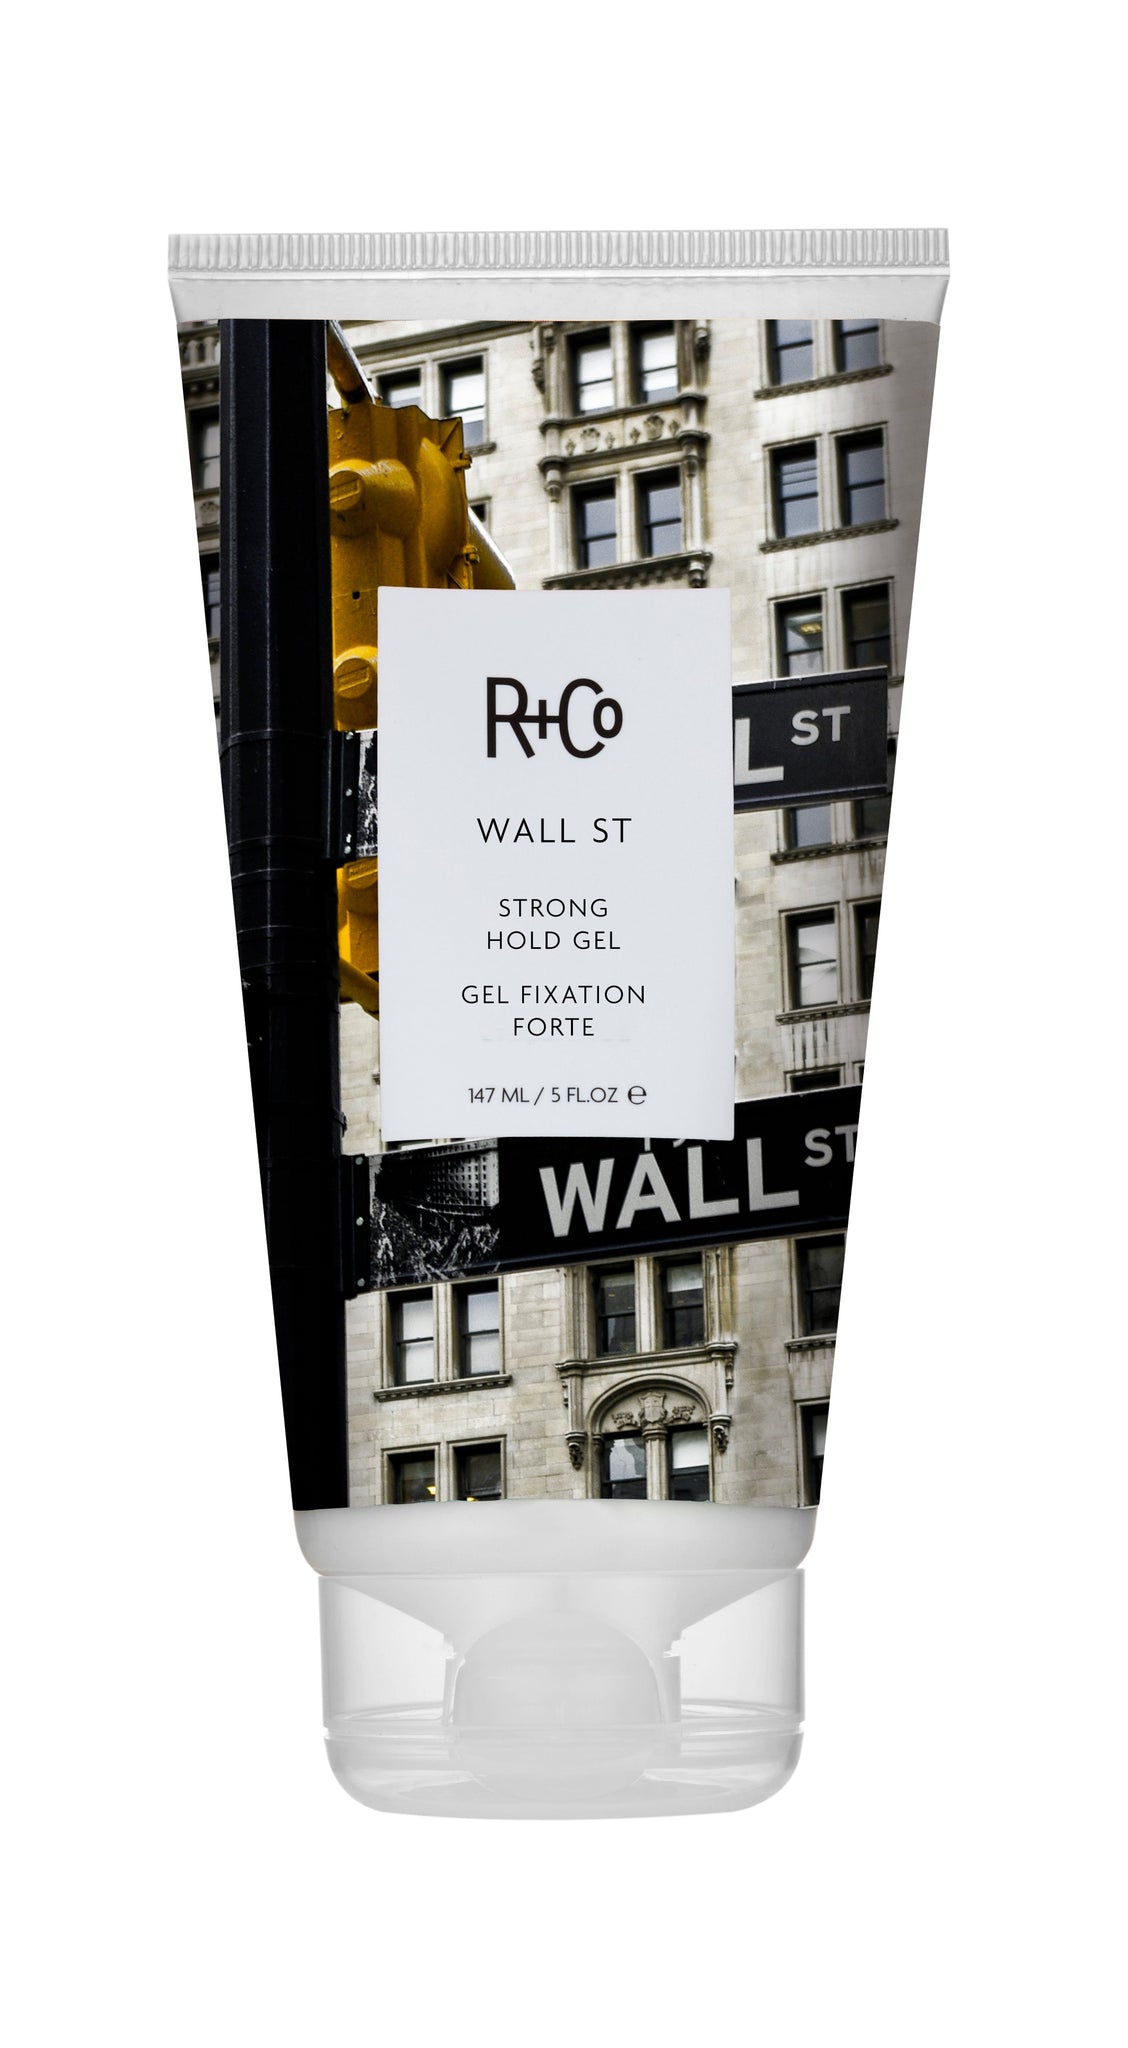 R+Co WALL ST / Strong Hold Gel 147ml